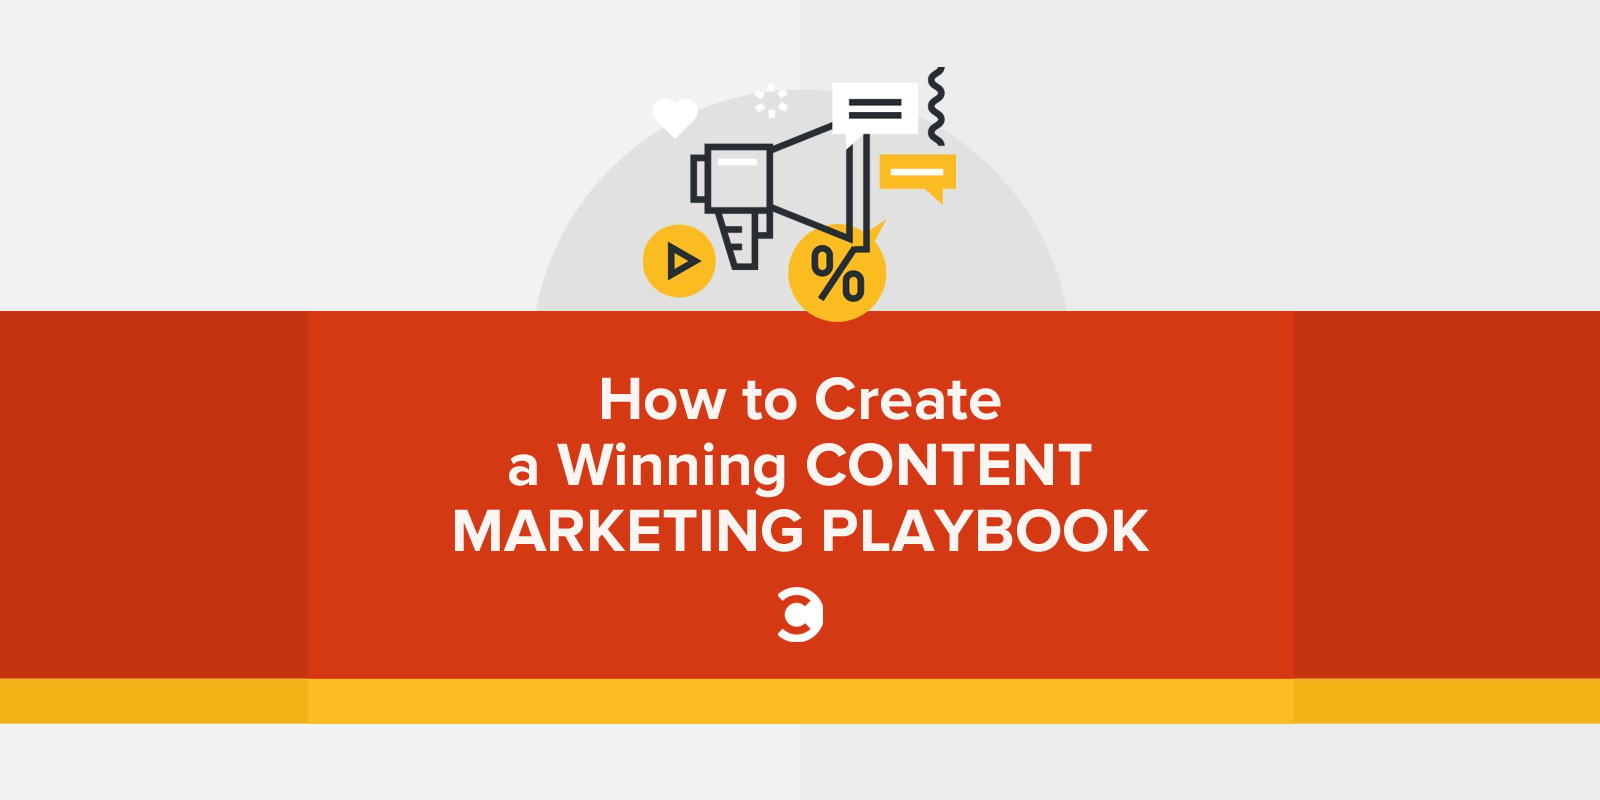 How to Create a Winning Content Marketing Playbook